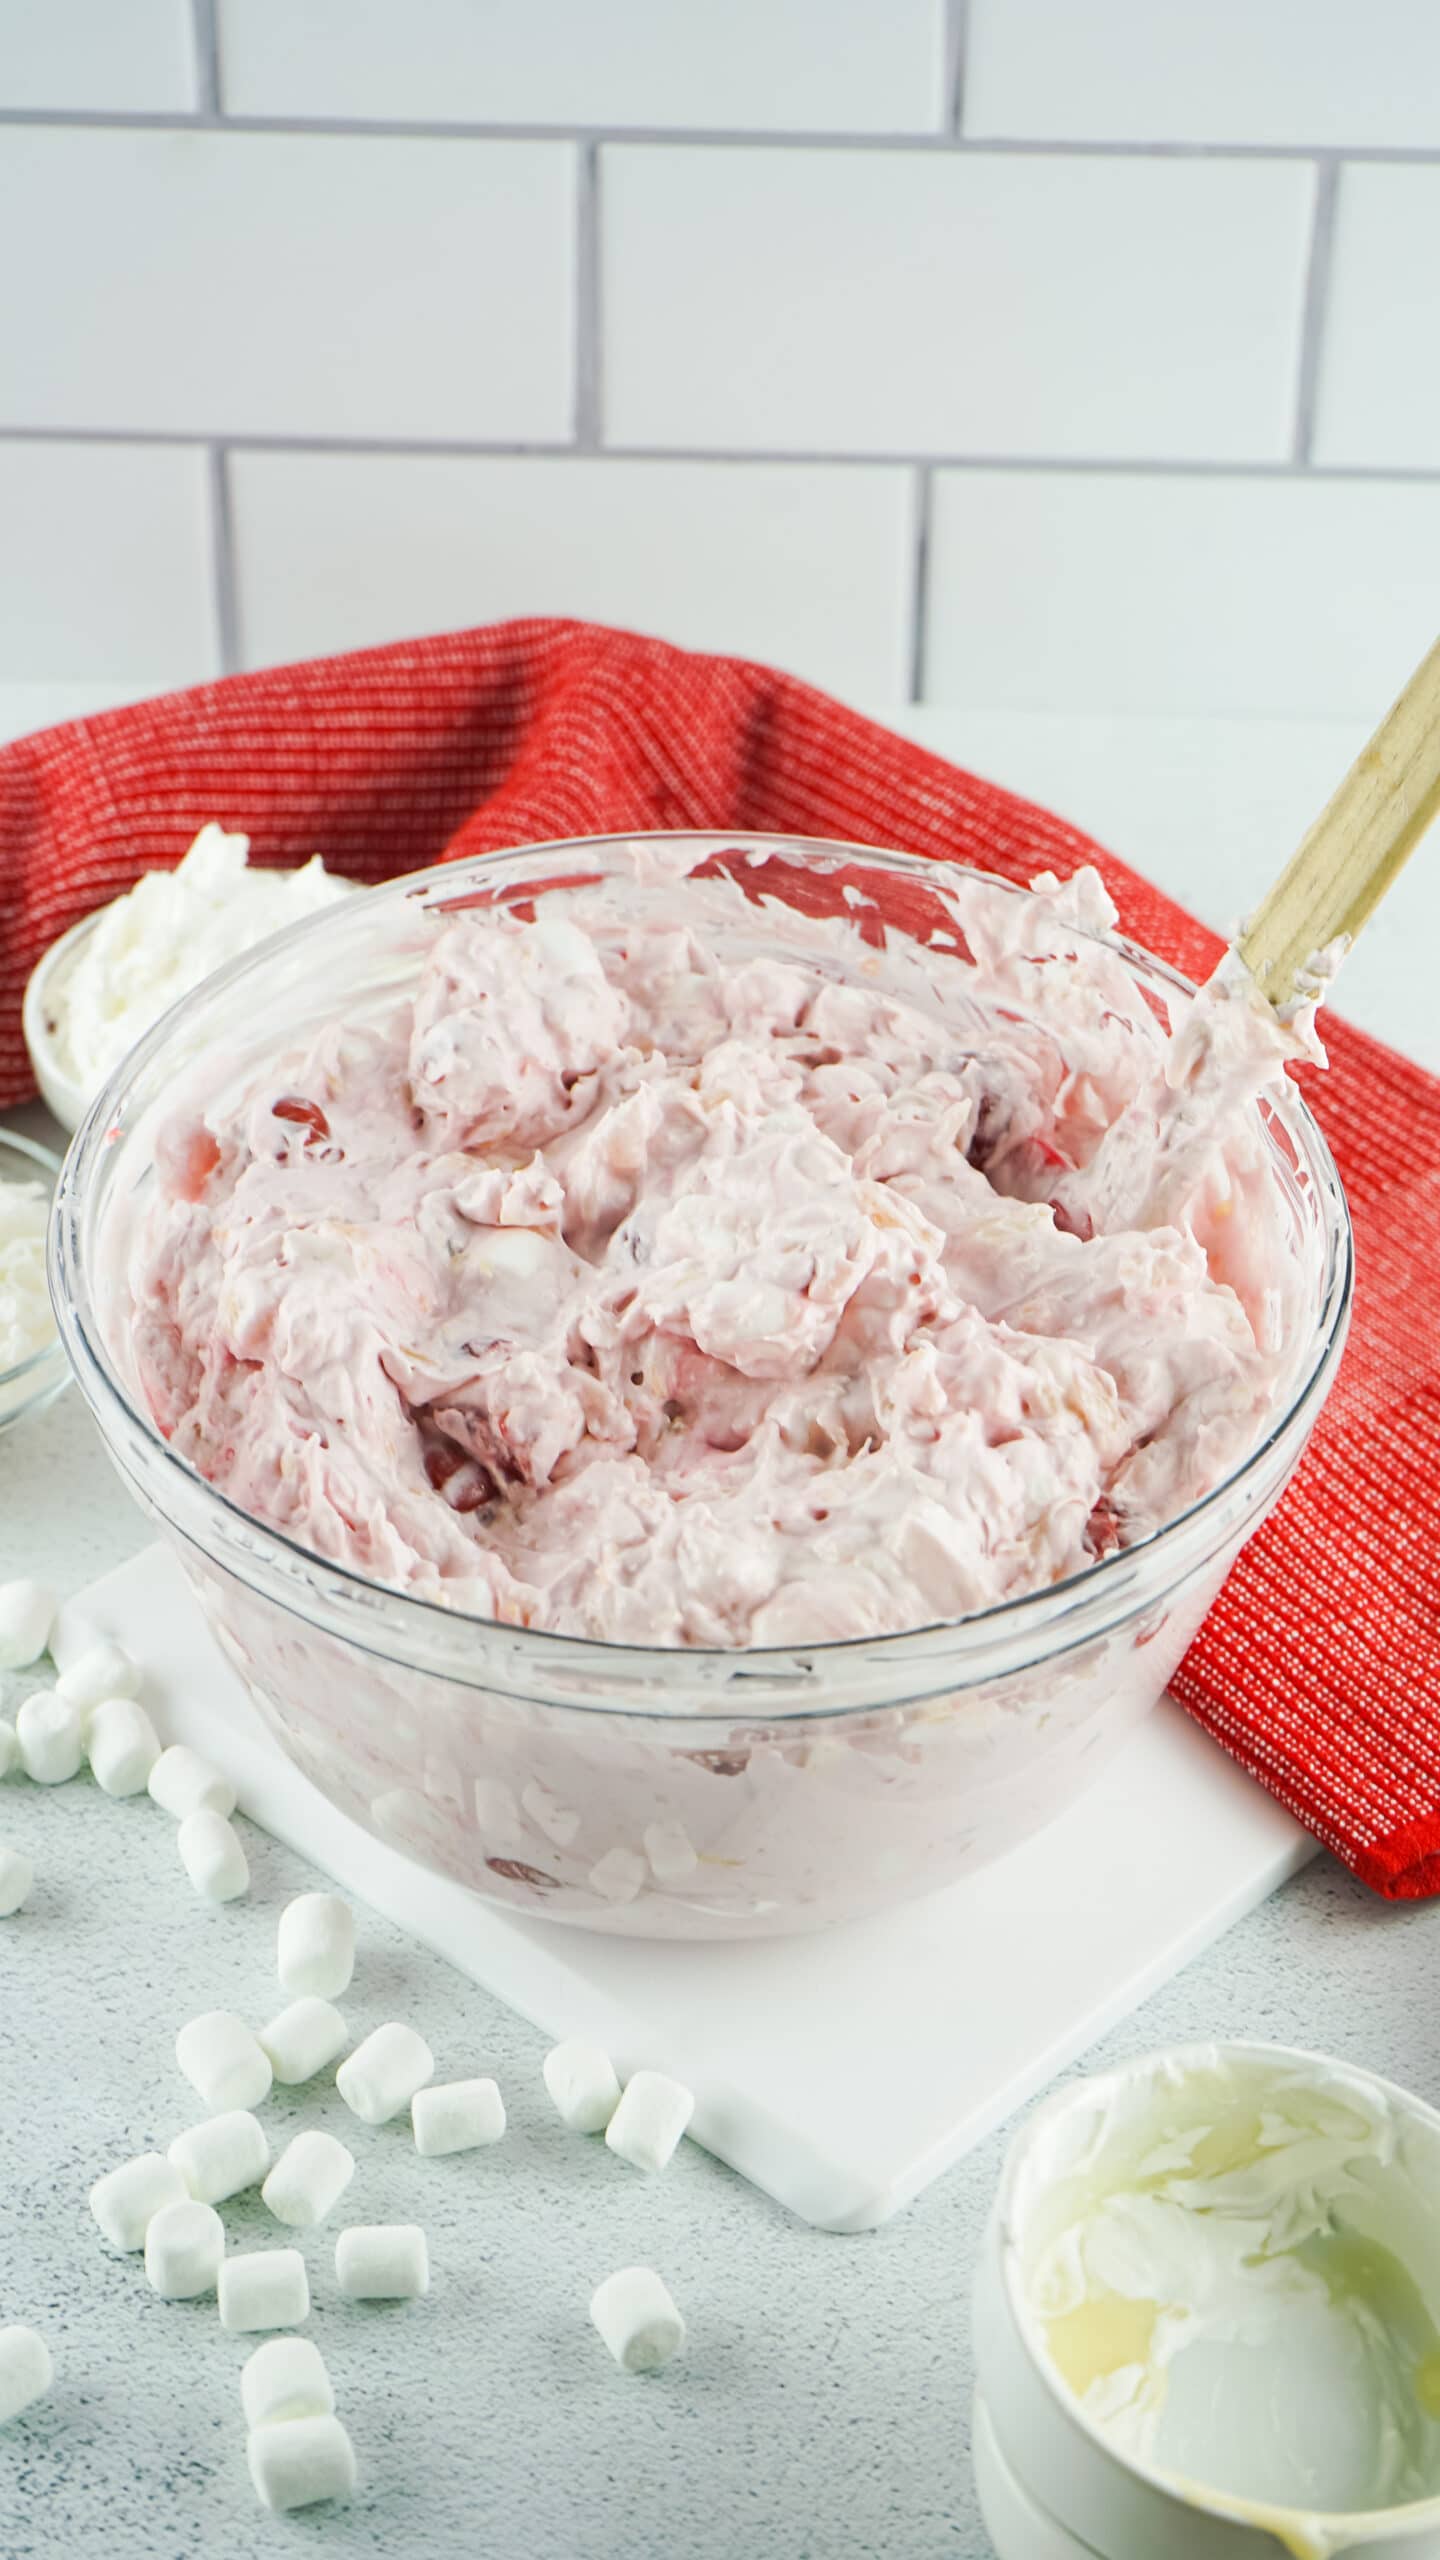 Cherry fluff in a clear bowl on a white table with a red towel in the background.